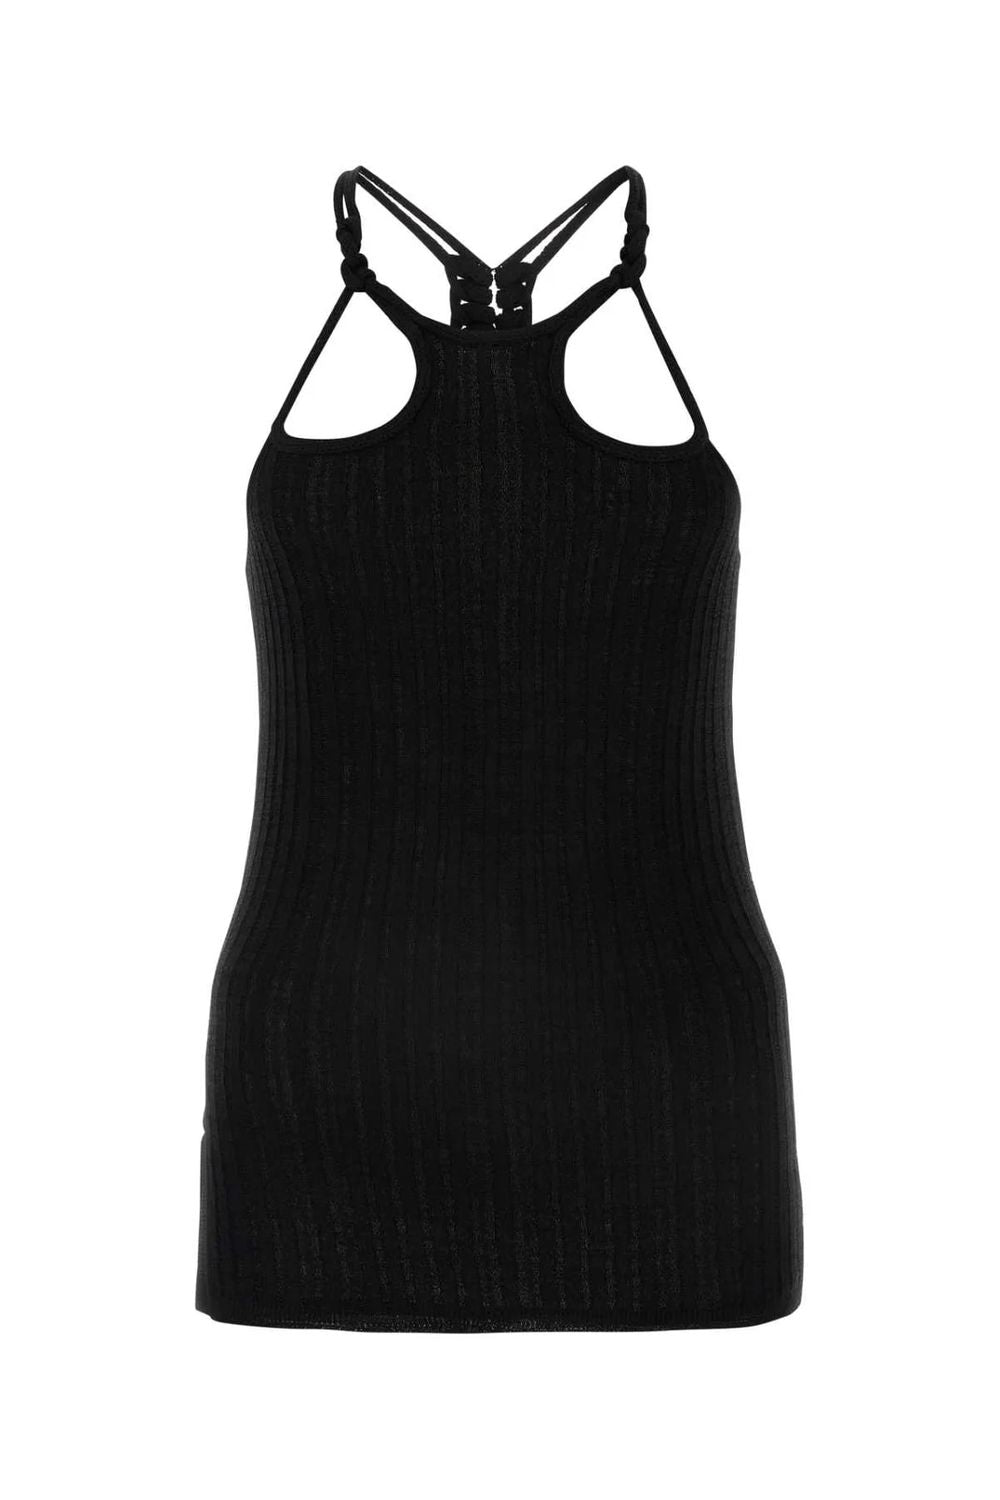 ISABEL MARANT Black Knit Top - Close to the Neck - SS24 Collection